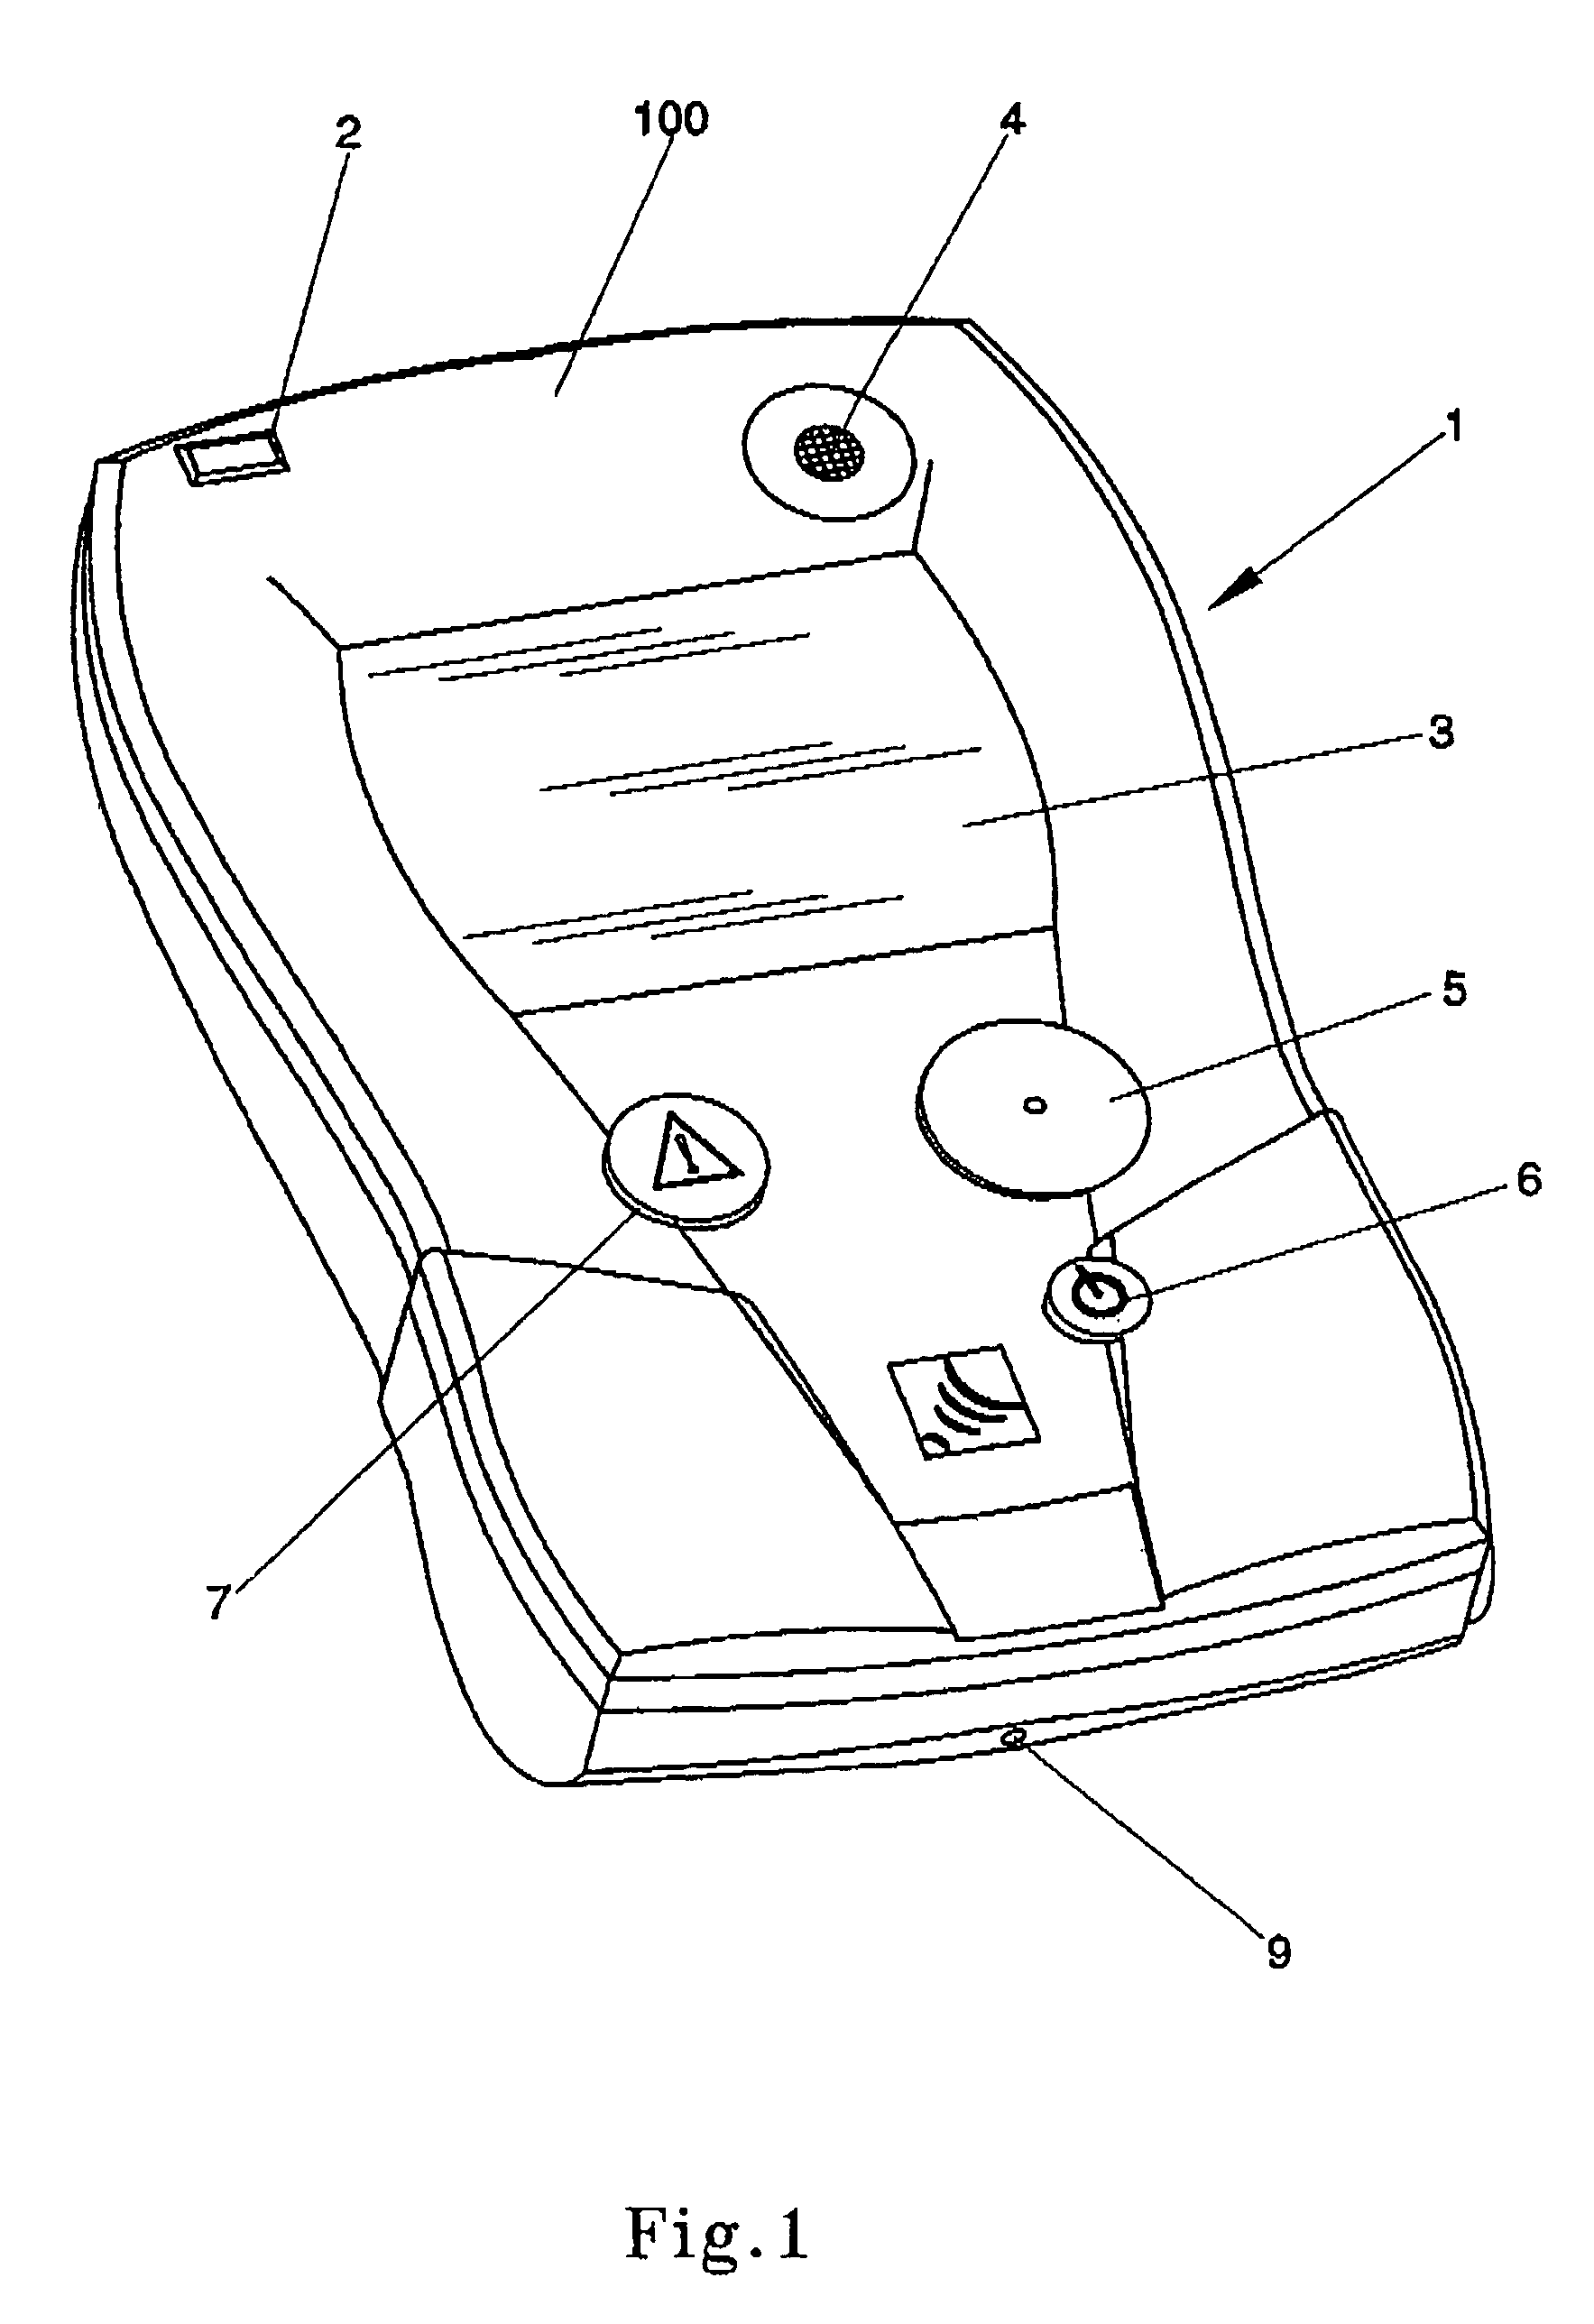 Personal noise monitoring apparatus and method